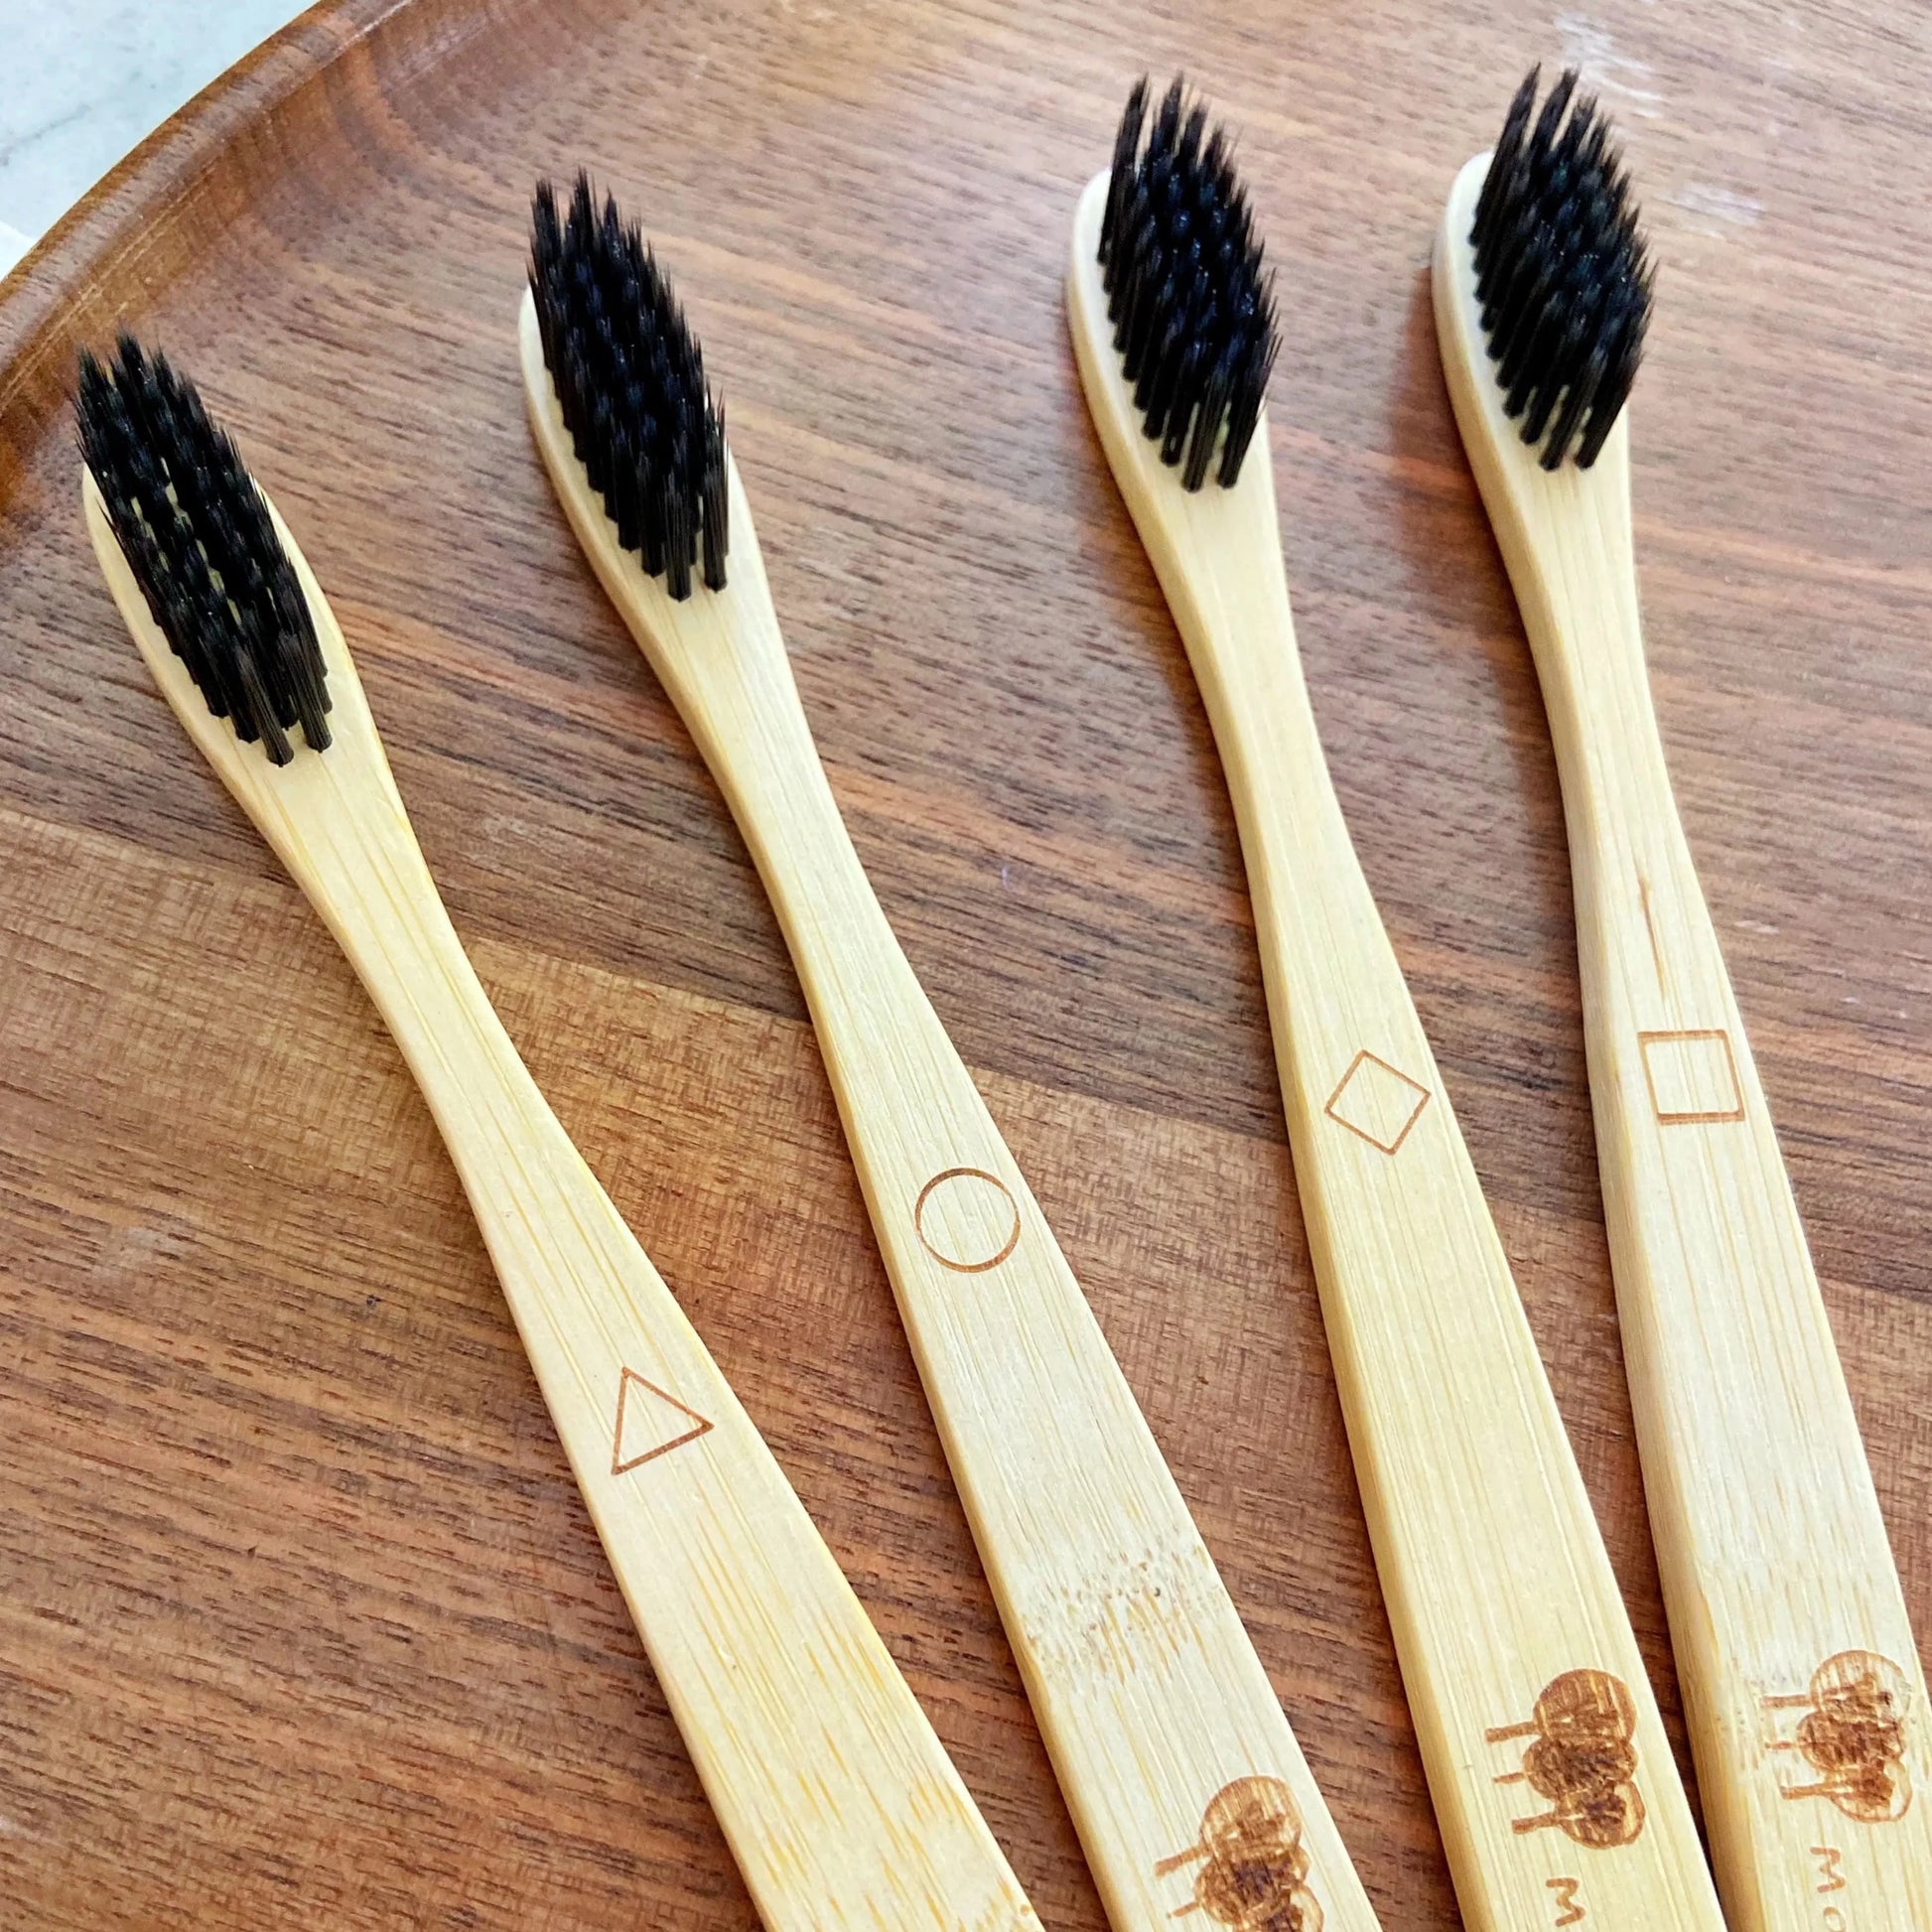 bamboo tooth brushes with active carbon bristles extra soft.  geometric shapes to tell them apart.  Up Close displayed on walnut tray